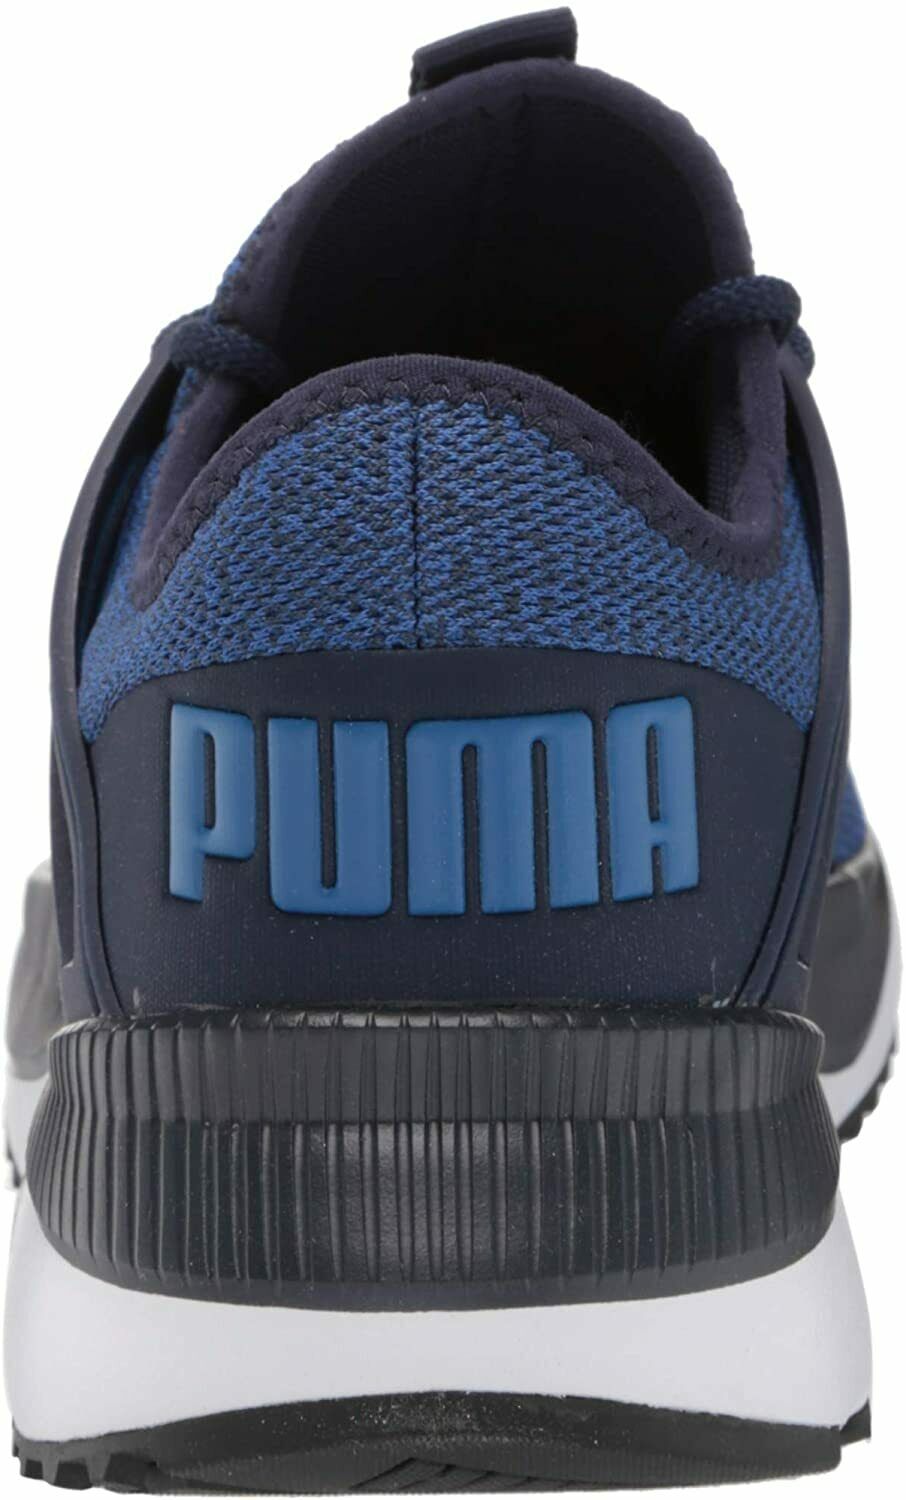 Puma Men's Pacer Future Knit Athletic Train Sneakers 38060301 - image 5 of 5